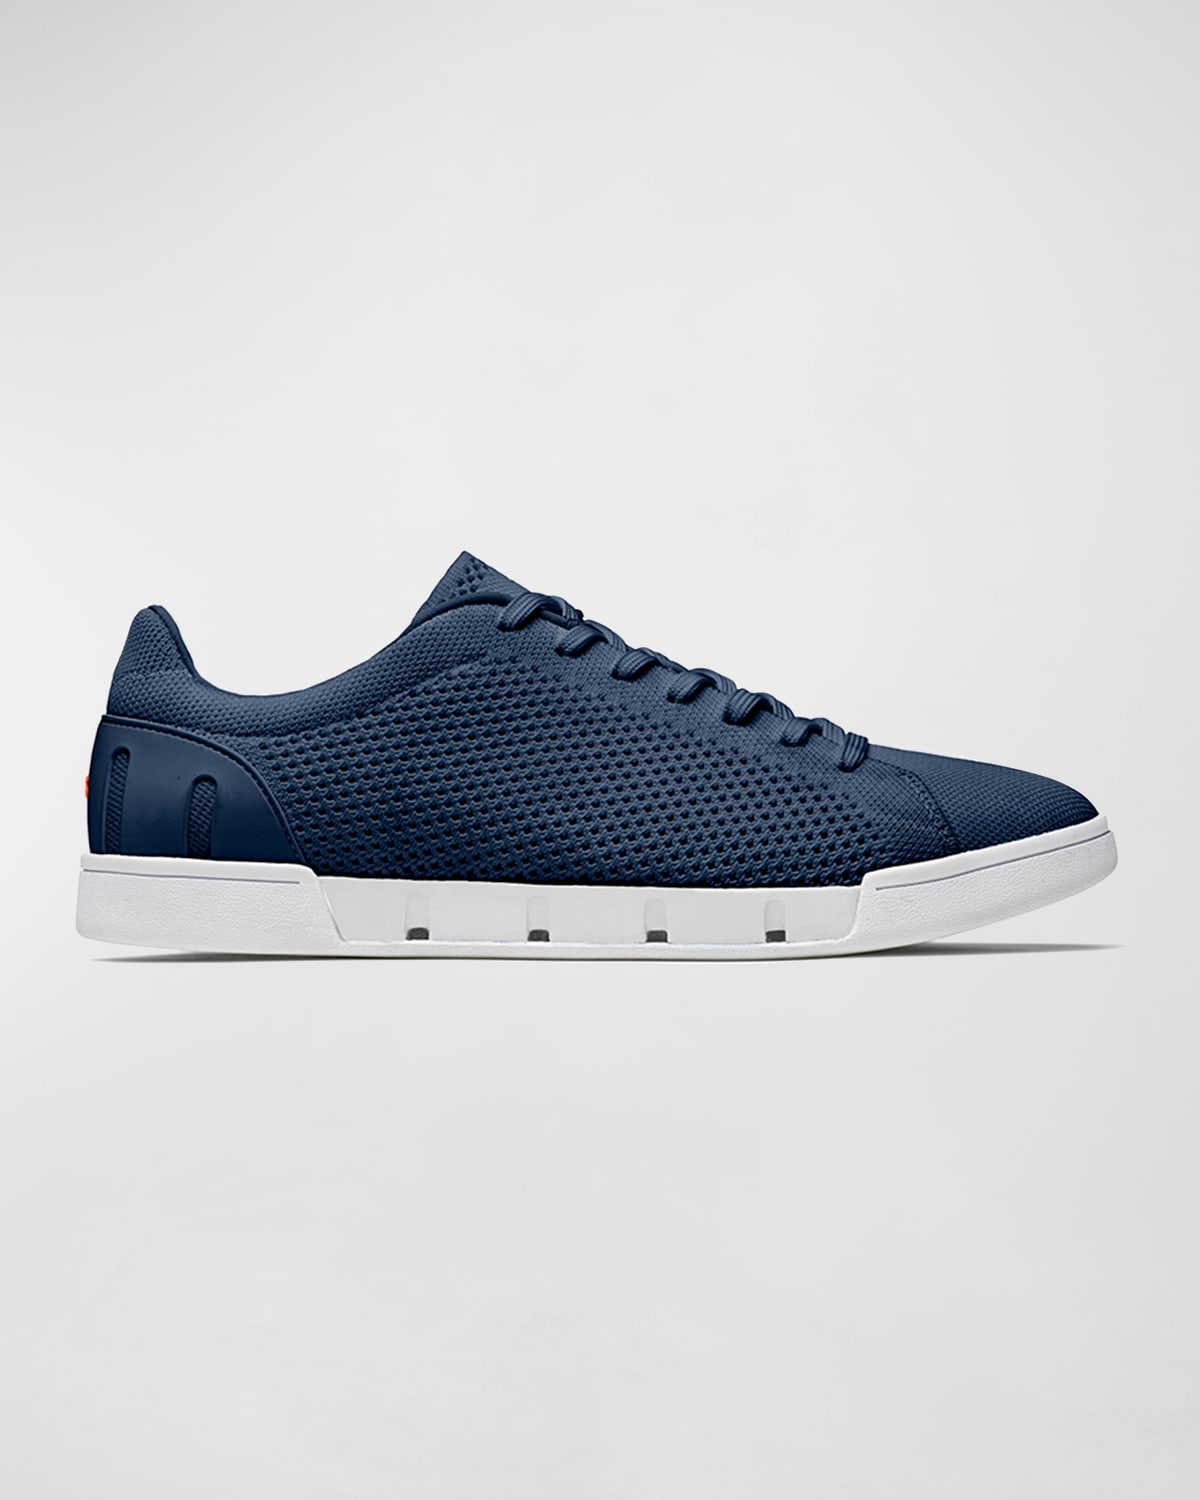 Swims Men's Breeze Knit Trainer Trainers In Navy/white